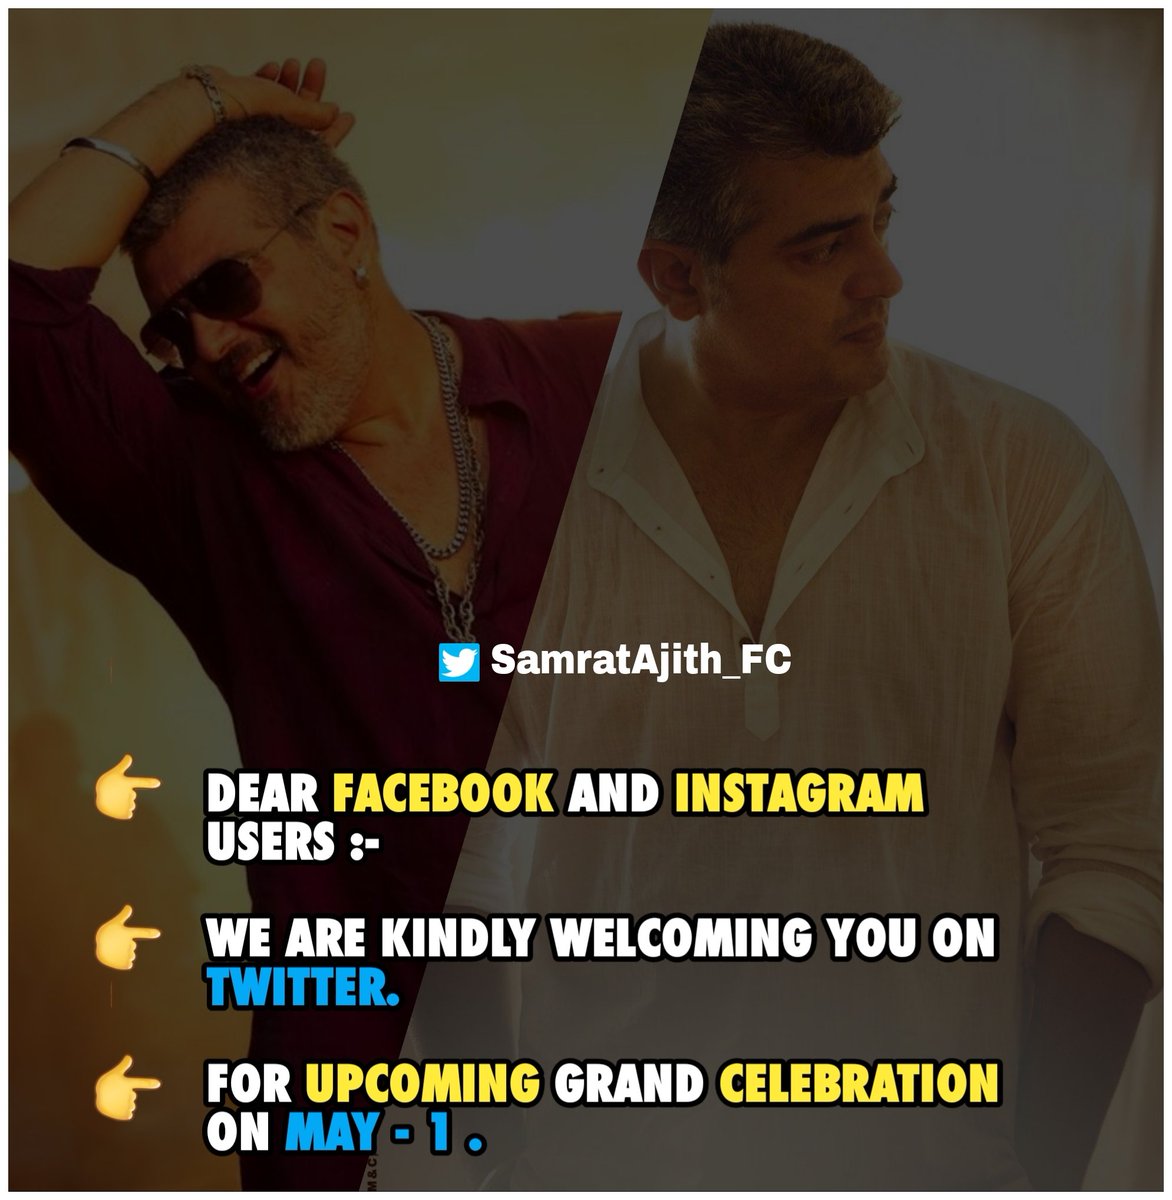 Here We Kindly Welcoming All FaceBooK And Instagram Users On TWITTER .

For #May1 🏆 Grand Celebration ❤👍
@SamratAJITH_FC

#Valimai #AjithKumar